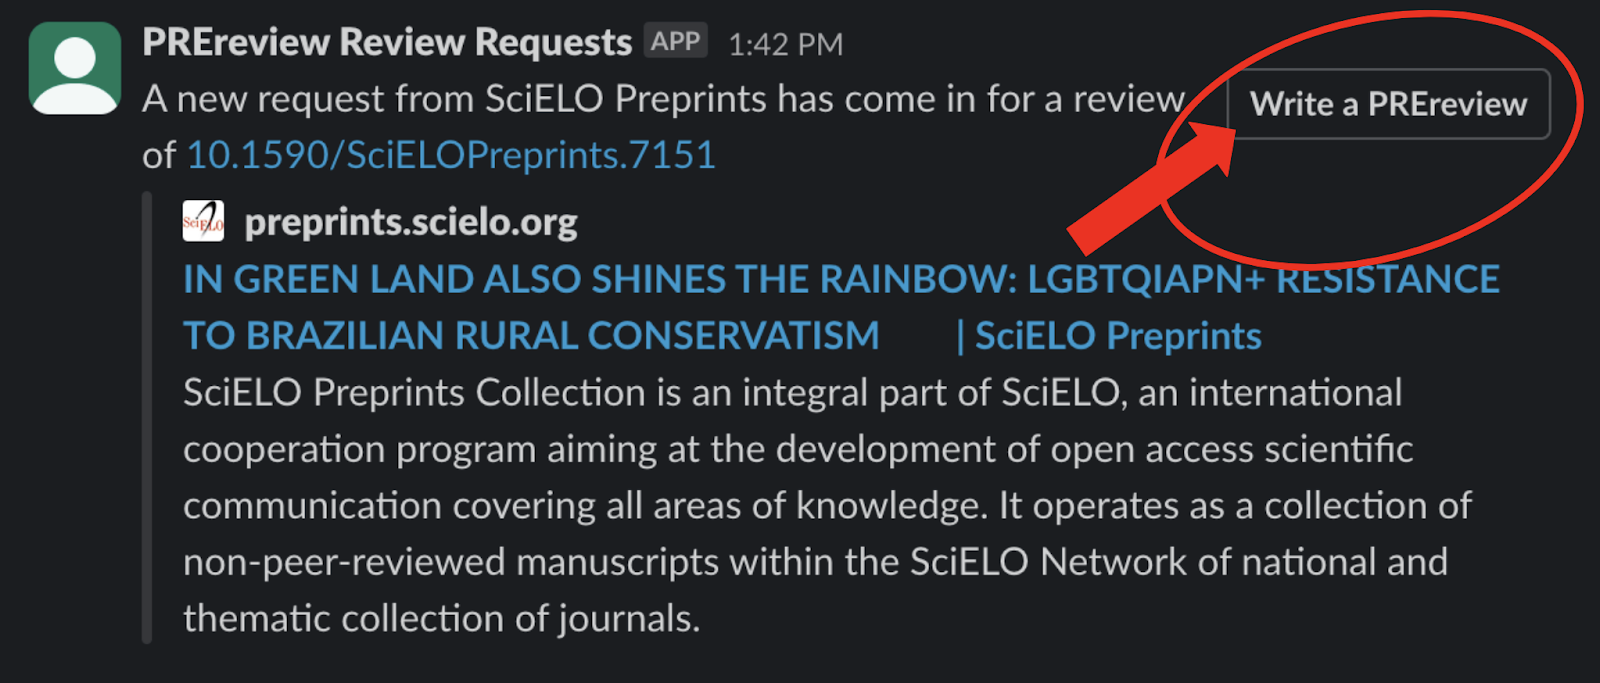 An example of a published request on the PREreview community Slack with the "Write a PREreview" button circled in red and highlighted by a red arrow